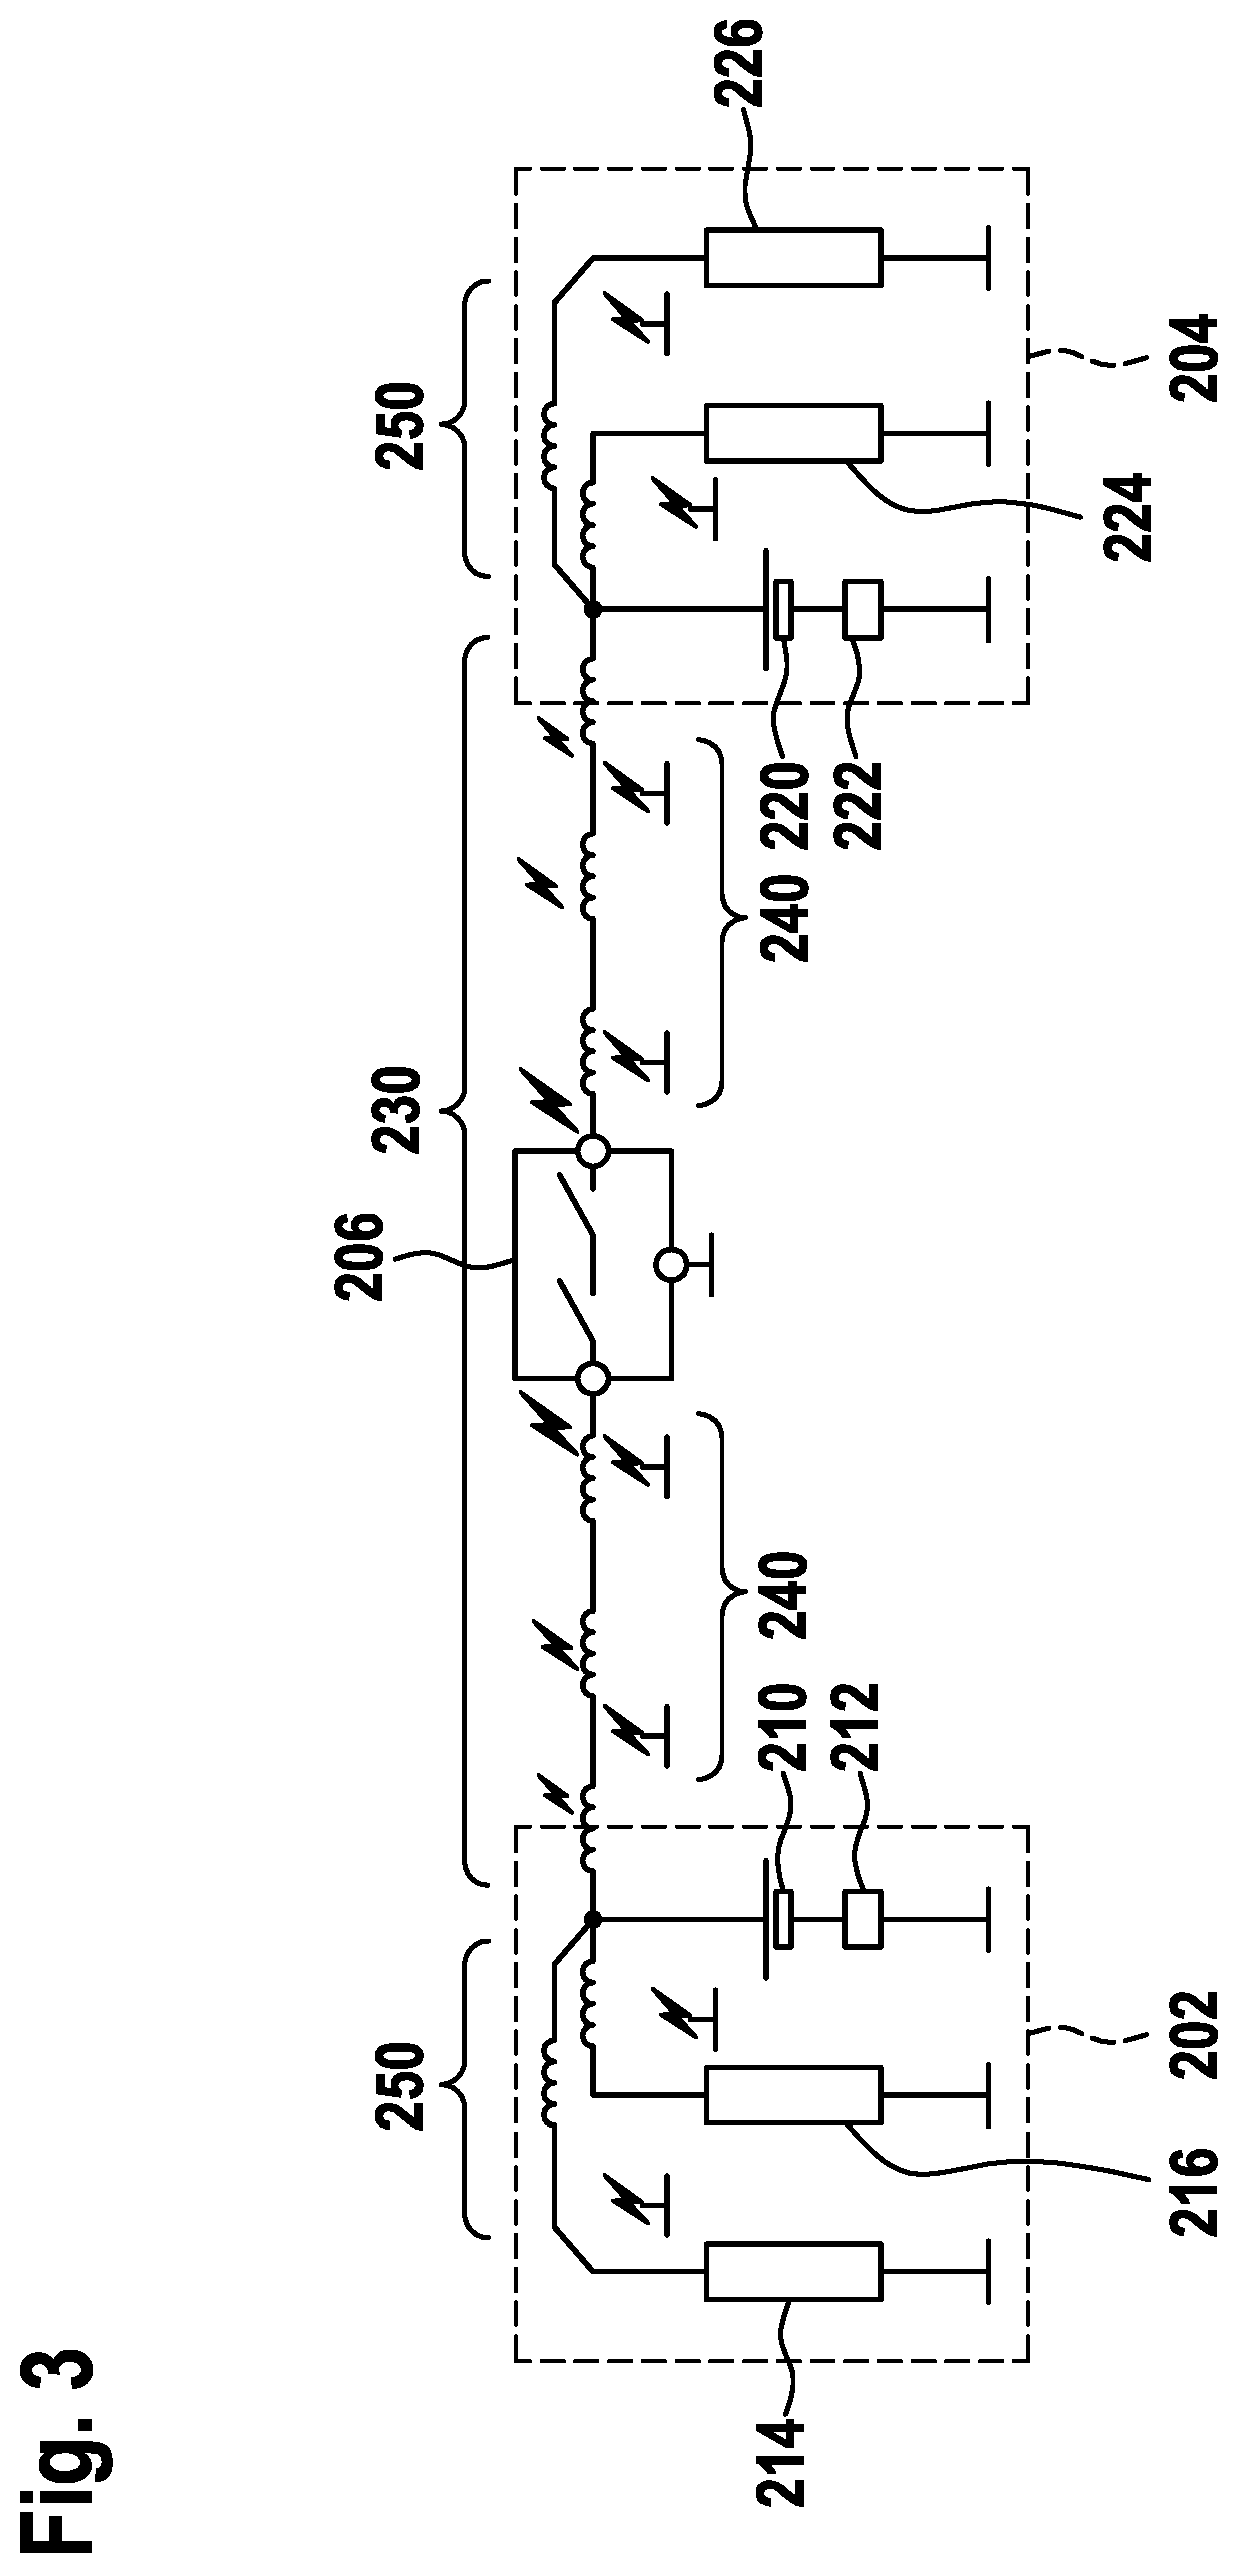 Battery terminal with a star-point connection switch configuration for a vehicle electrical system